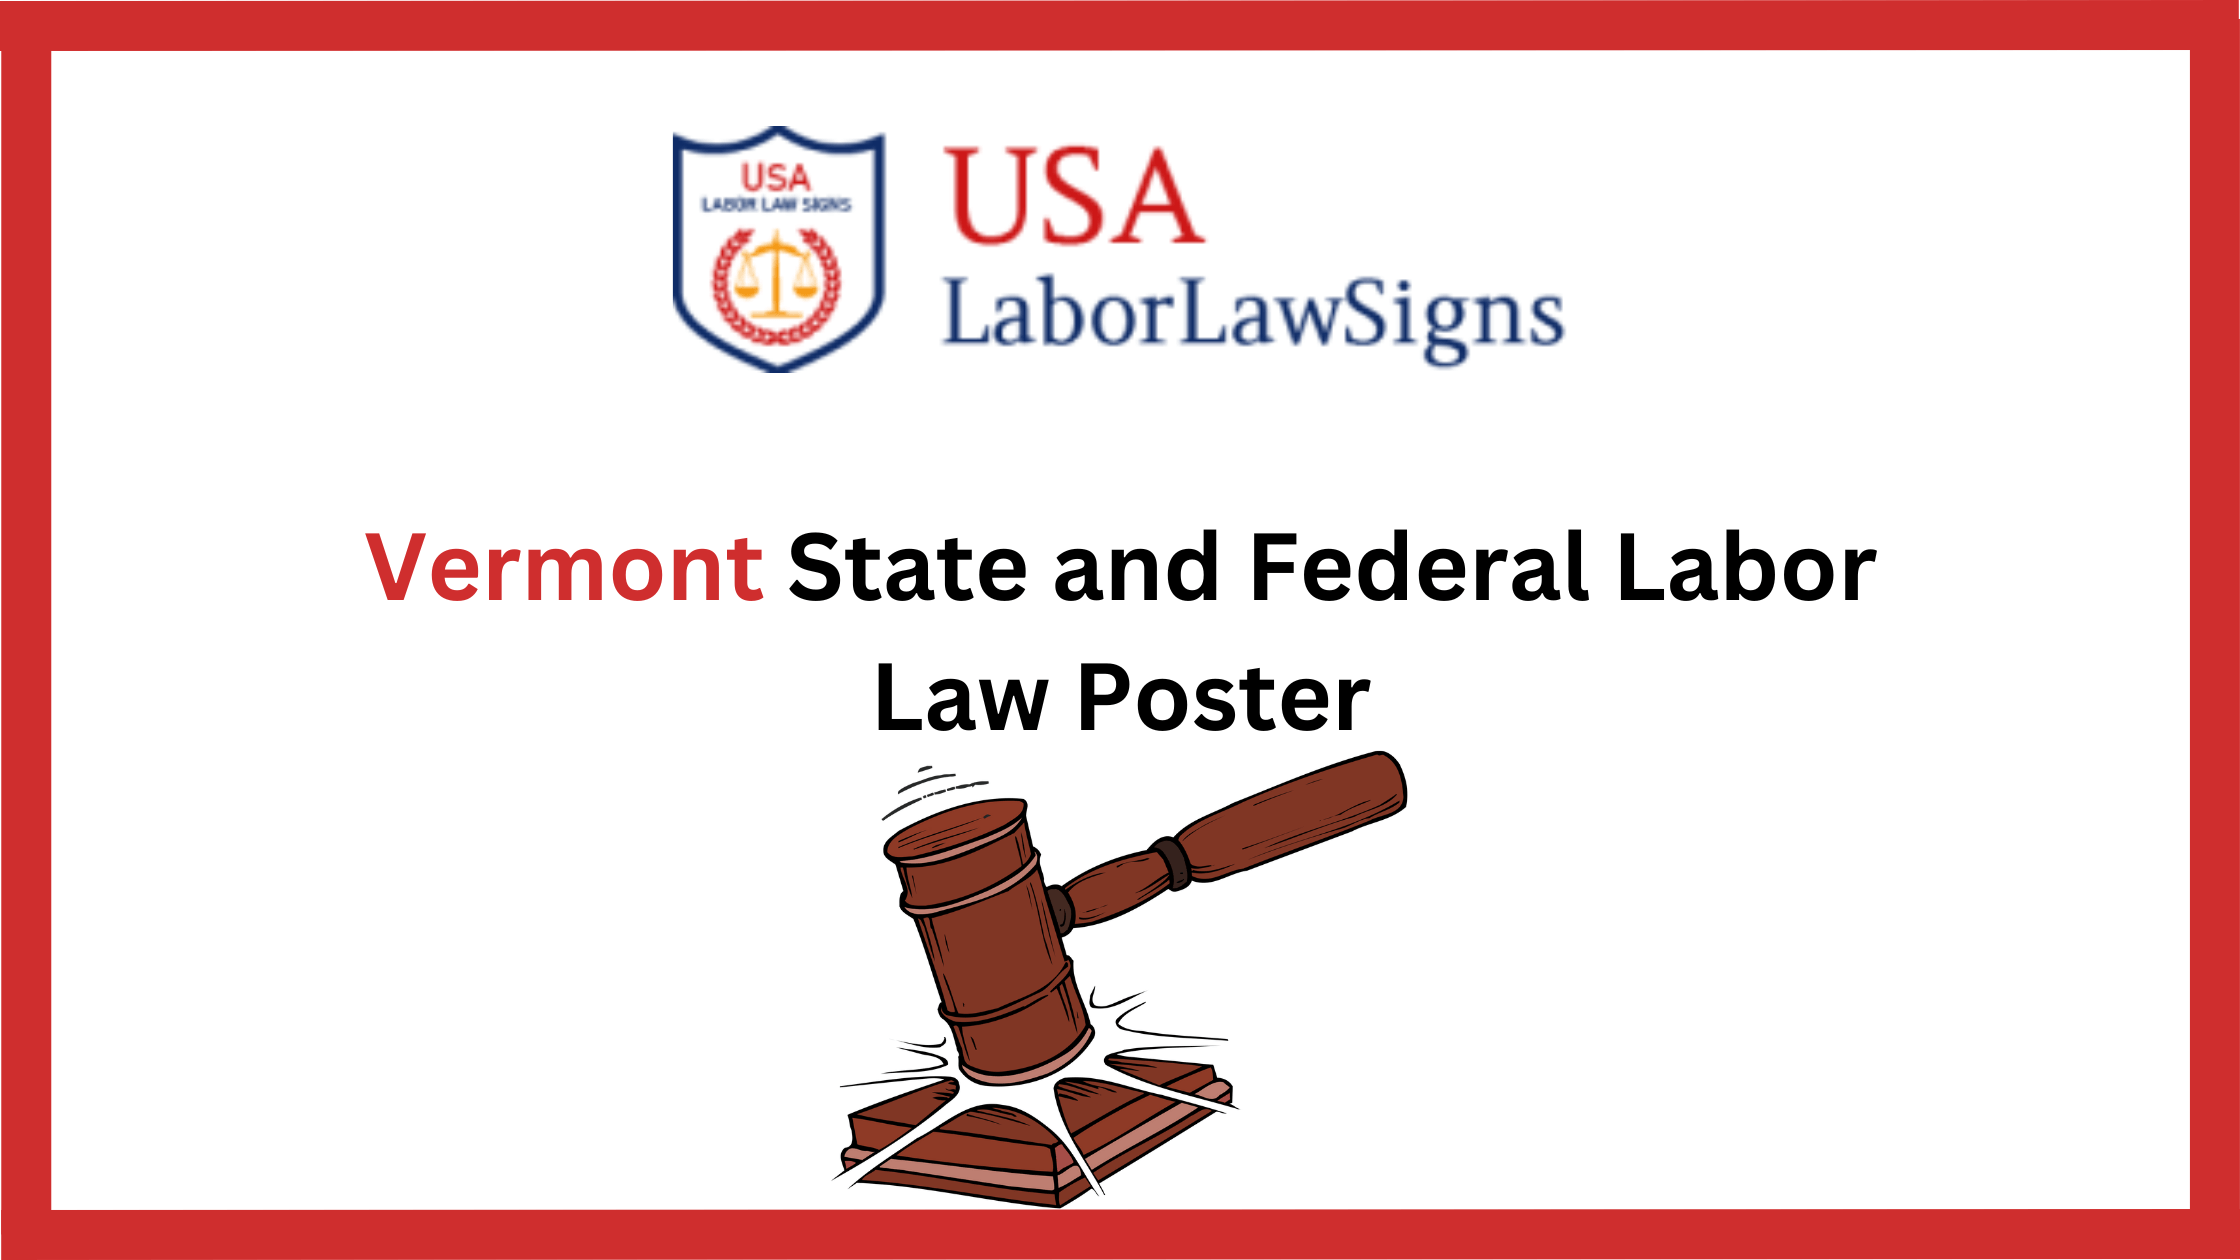 Vermont State and Federal Labor Law Poster